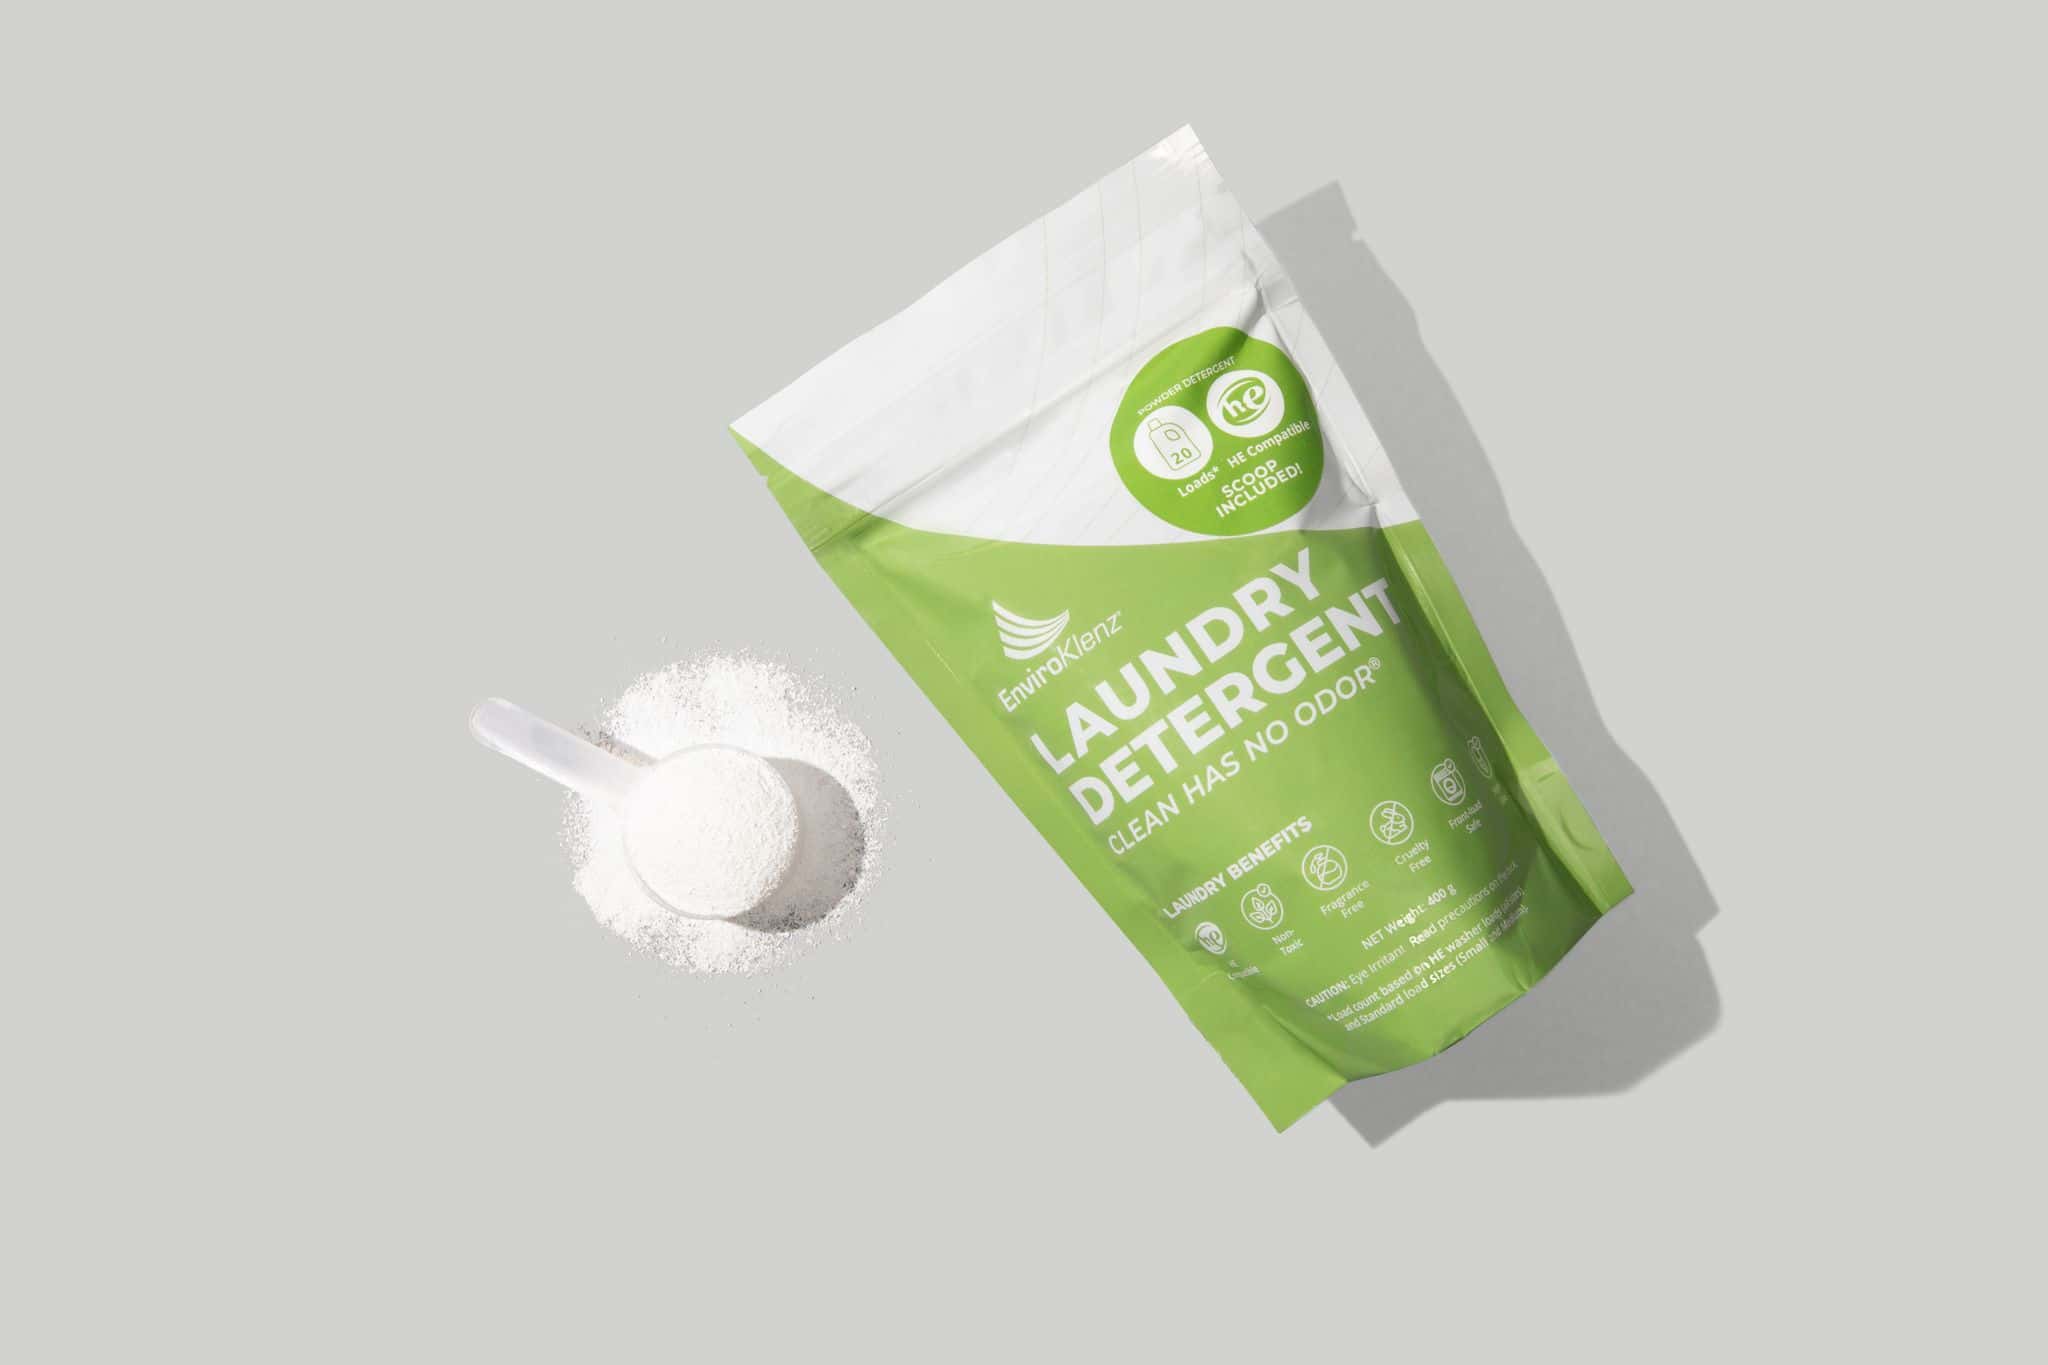 EnviroKlenz Laundry Detergent Powder With a Spoon Full of the Detergent Powder